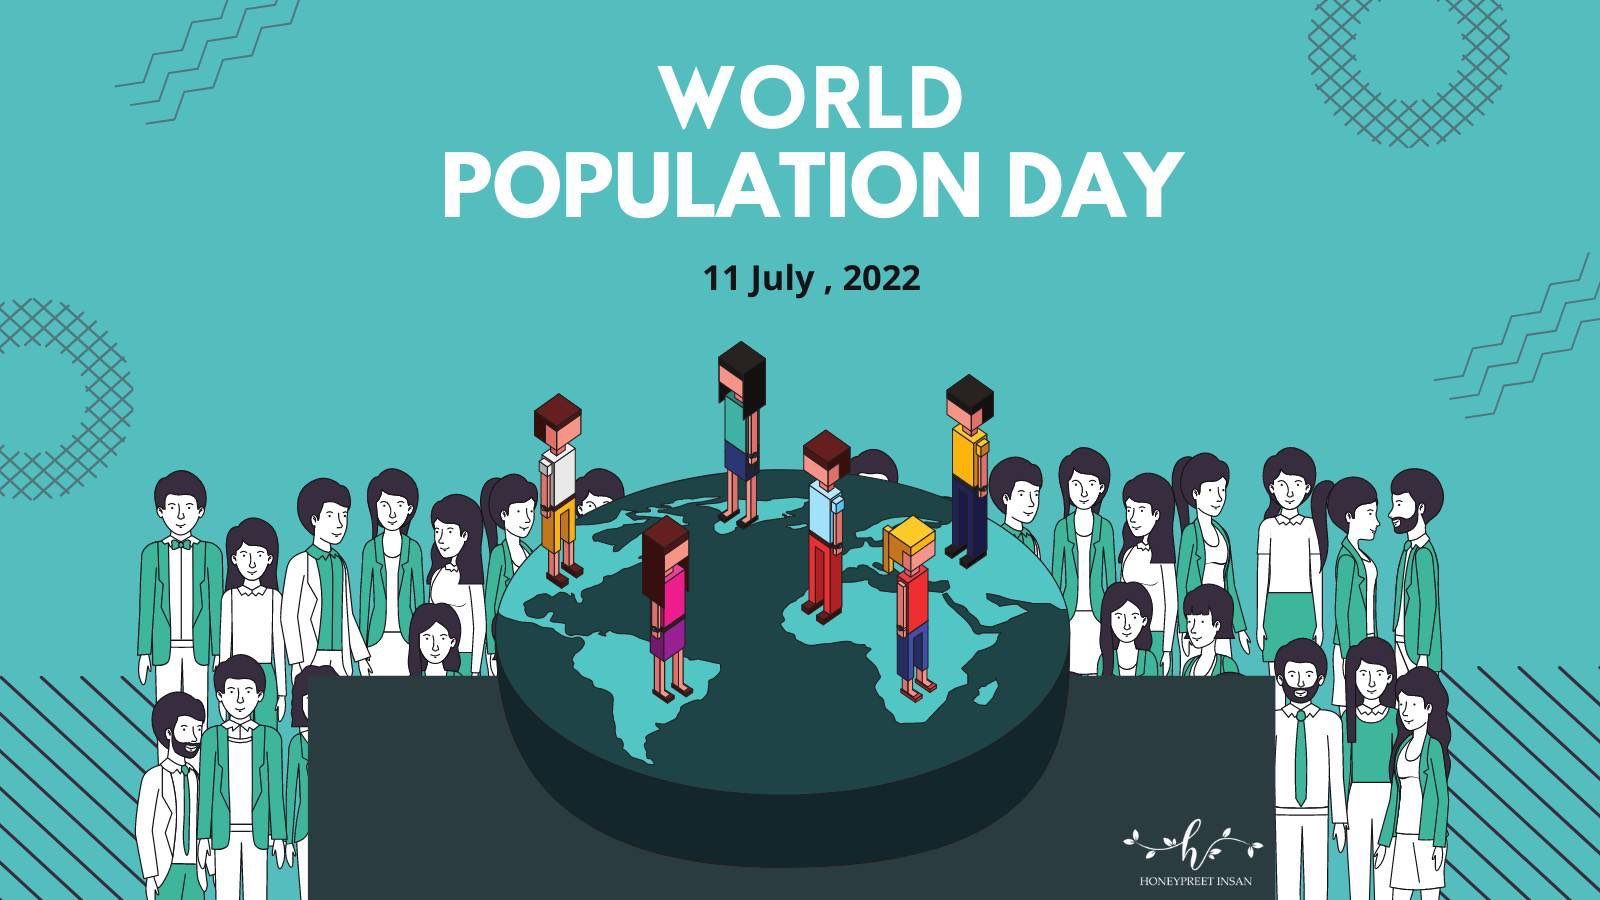 World Population Day: History, significance and theme